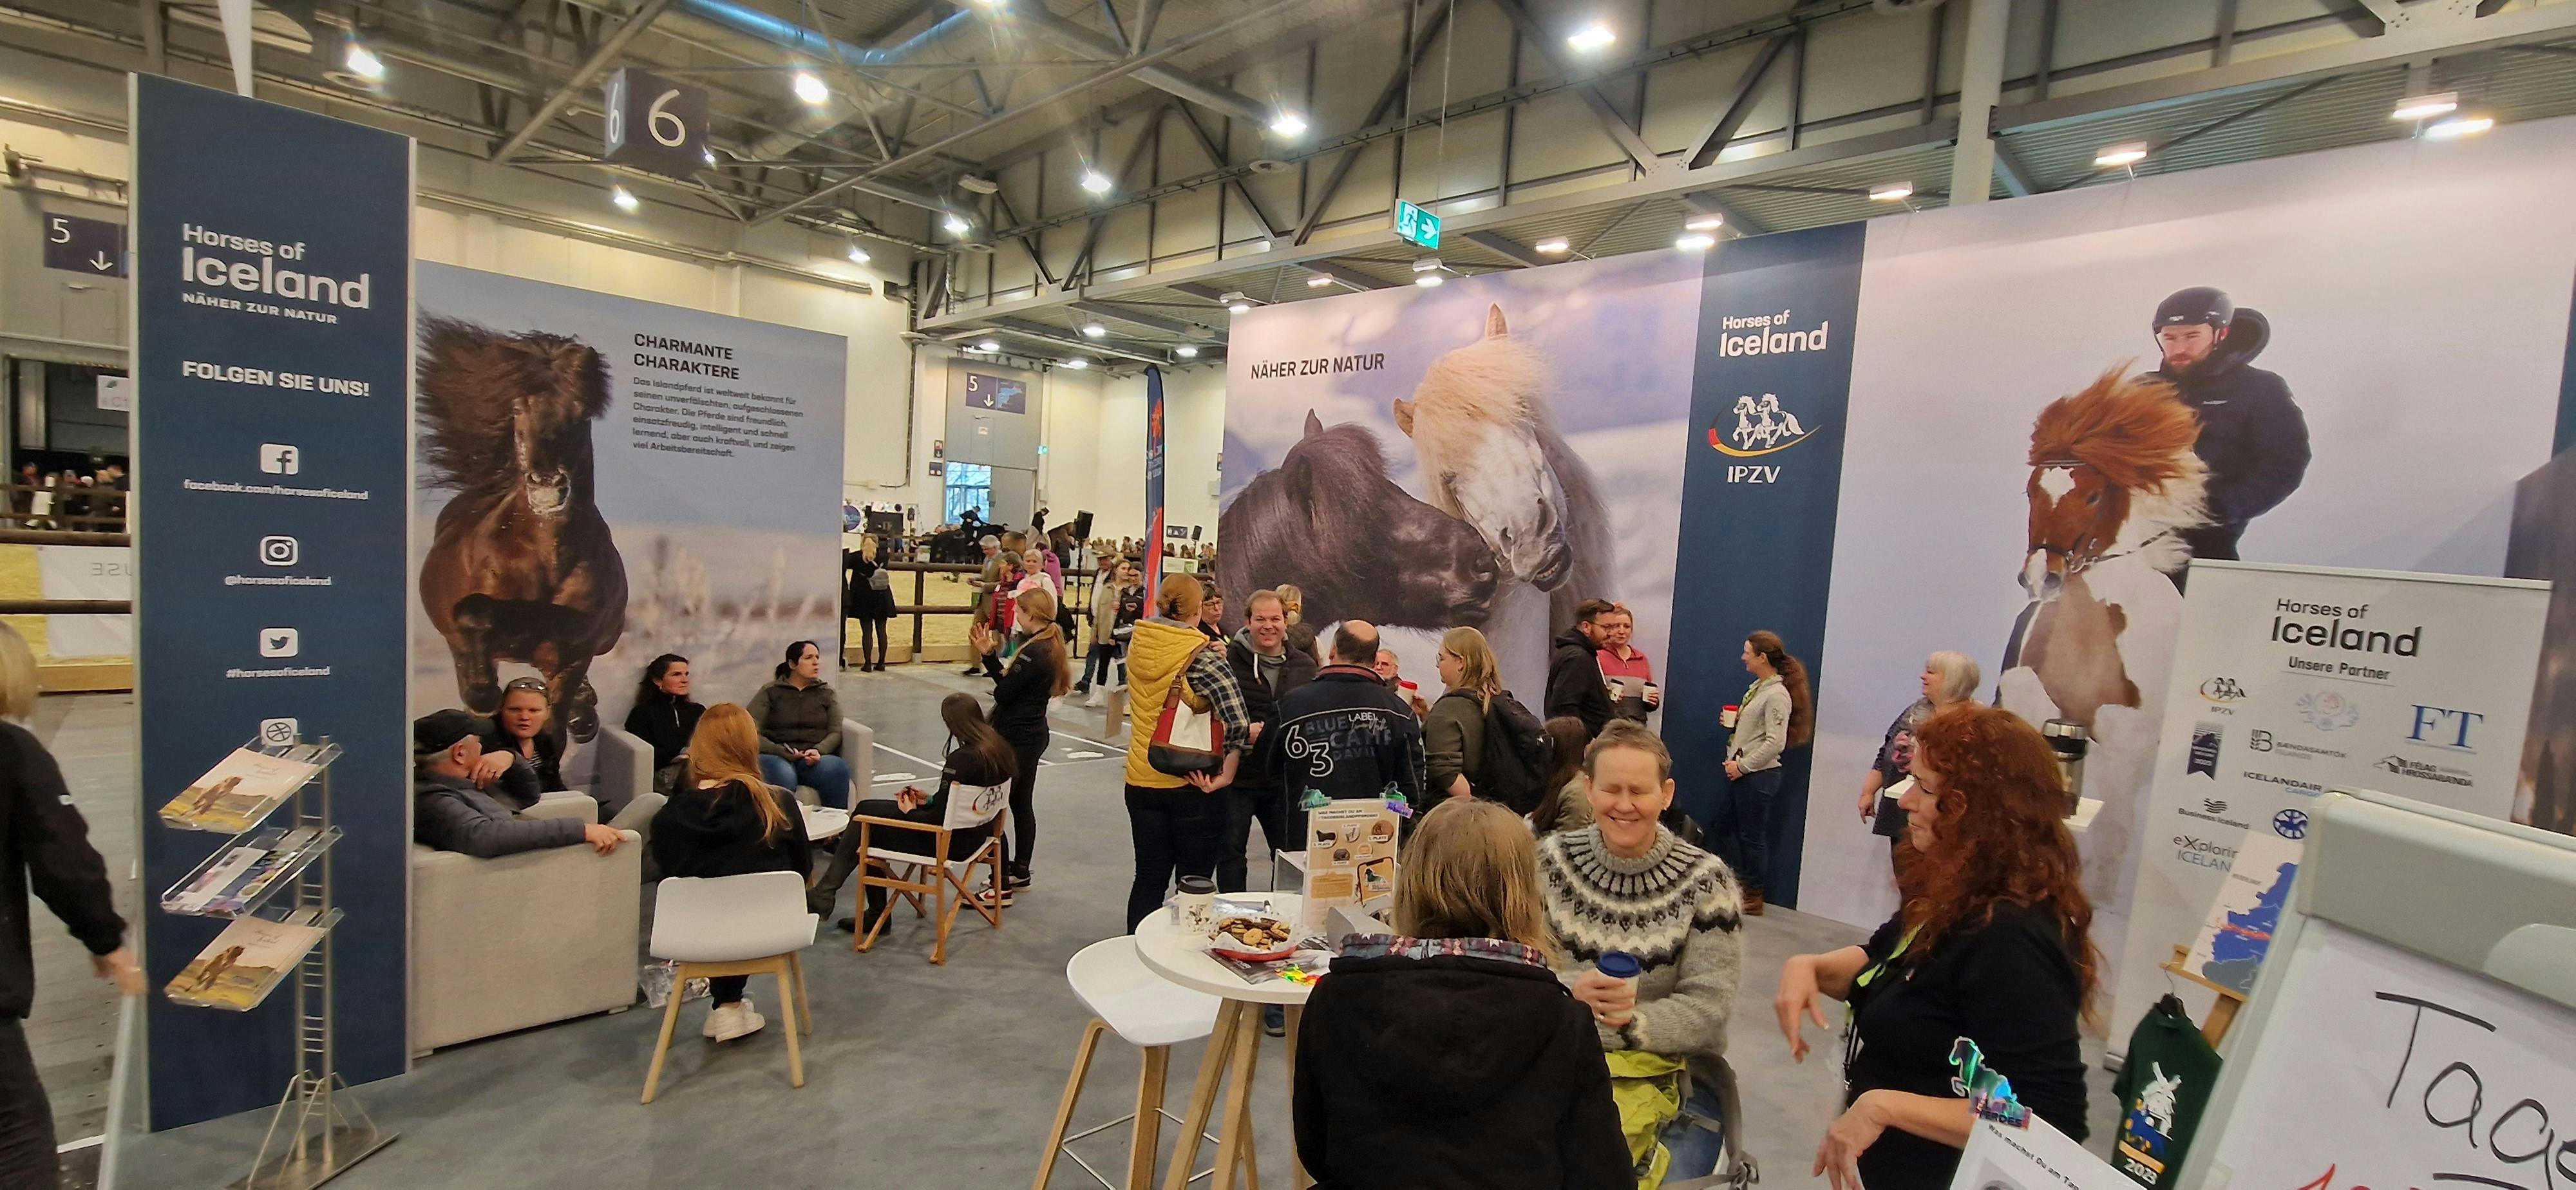 Horses of Iceland's booth full of visitors at Equitana in Essen, Germany.